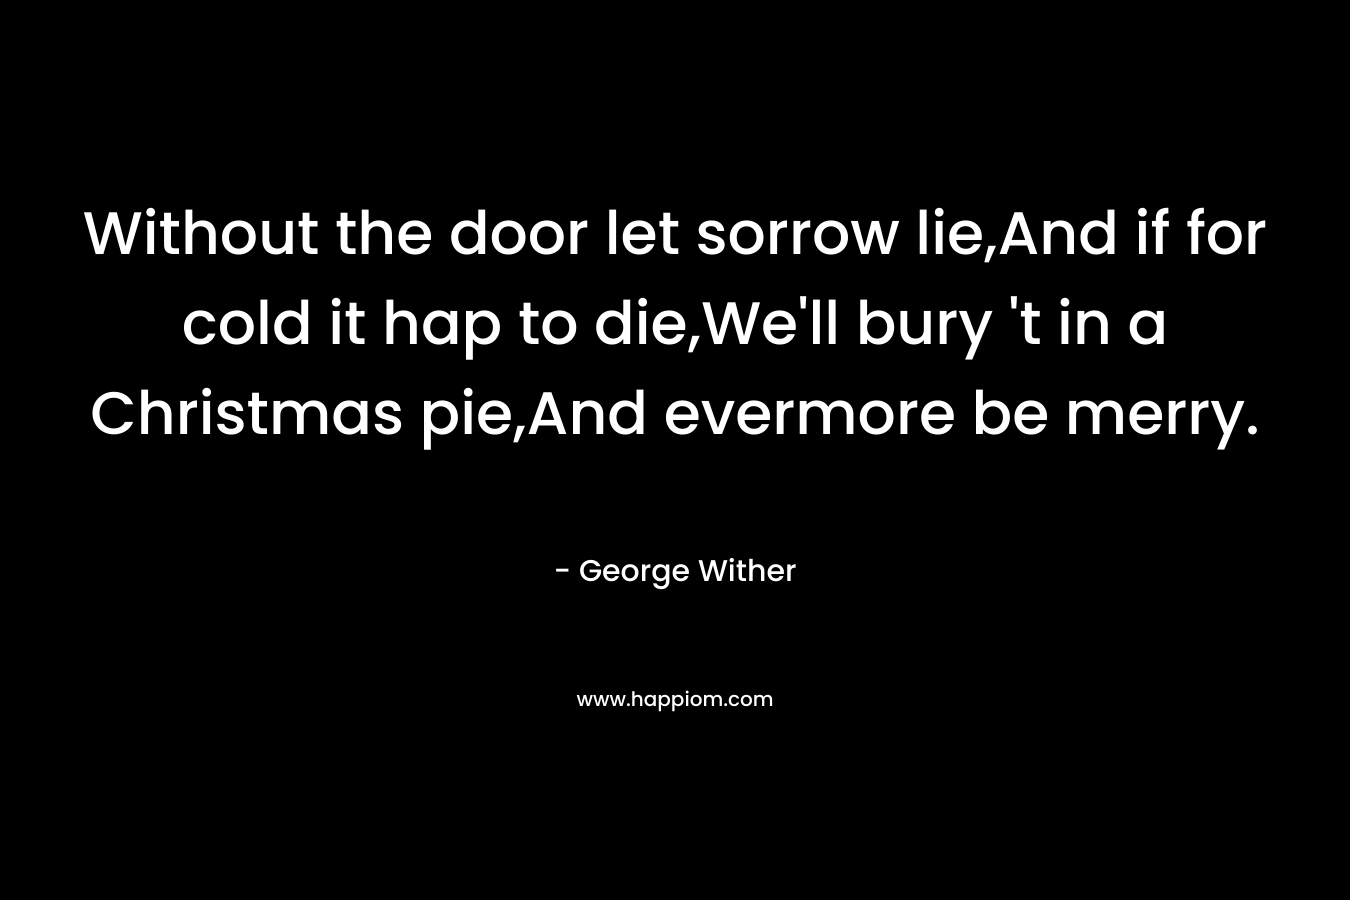 Without the door let sorrow lie,And if for cold it hap to die,We’ll bury ‘t in a Christmas pie,And evermore be merry. – George Wither